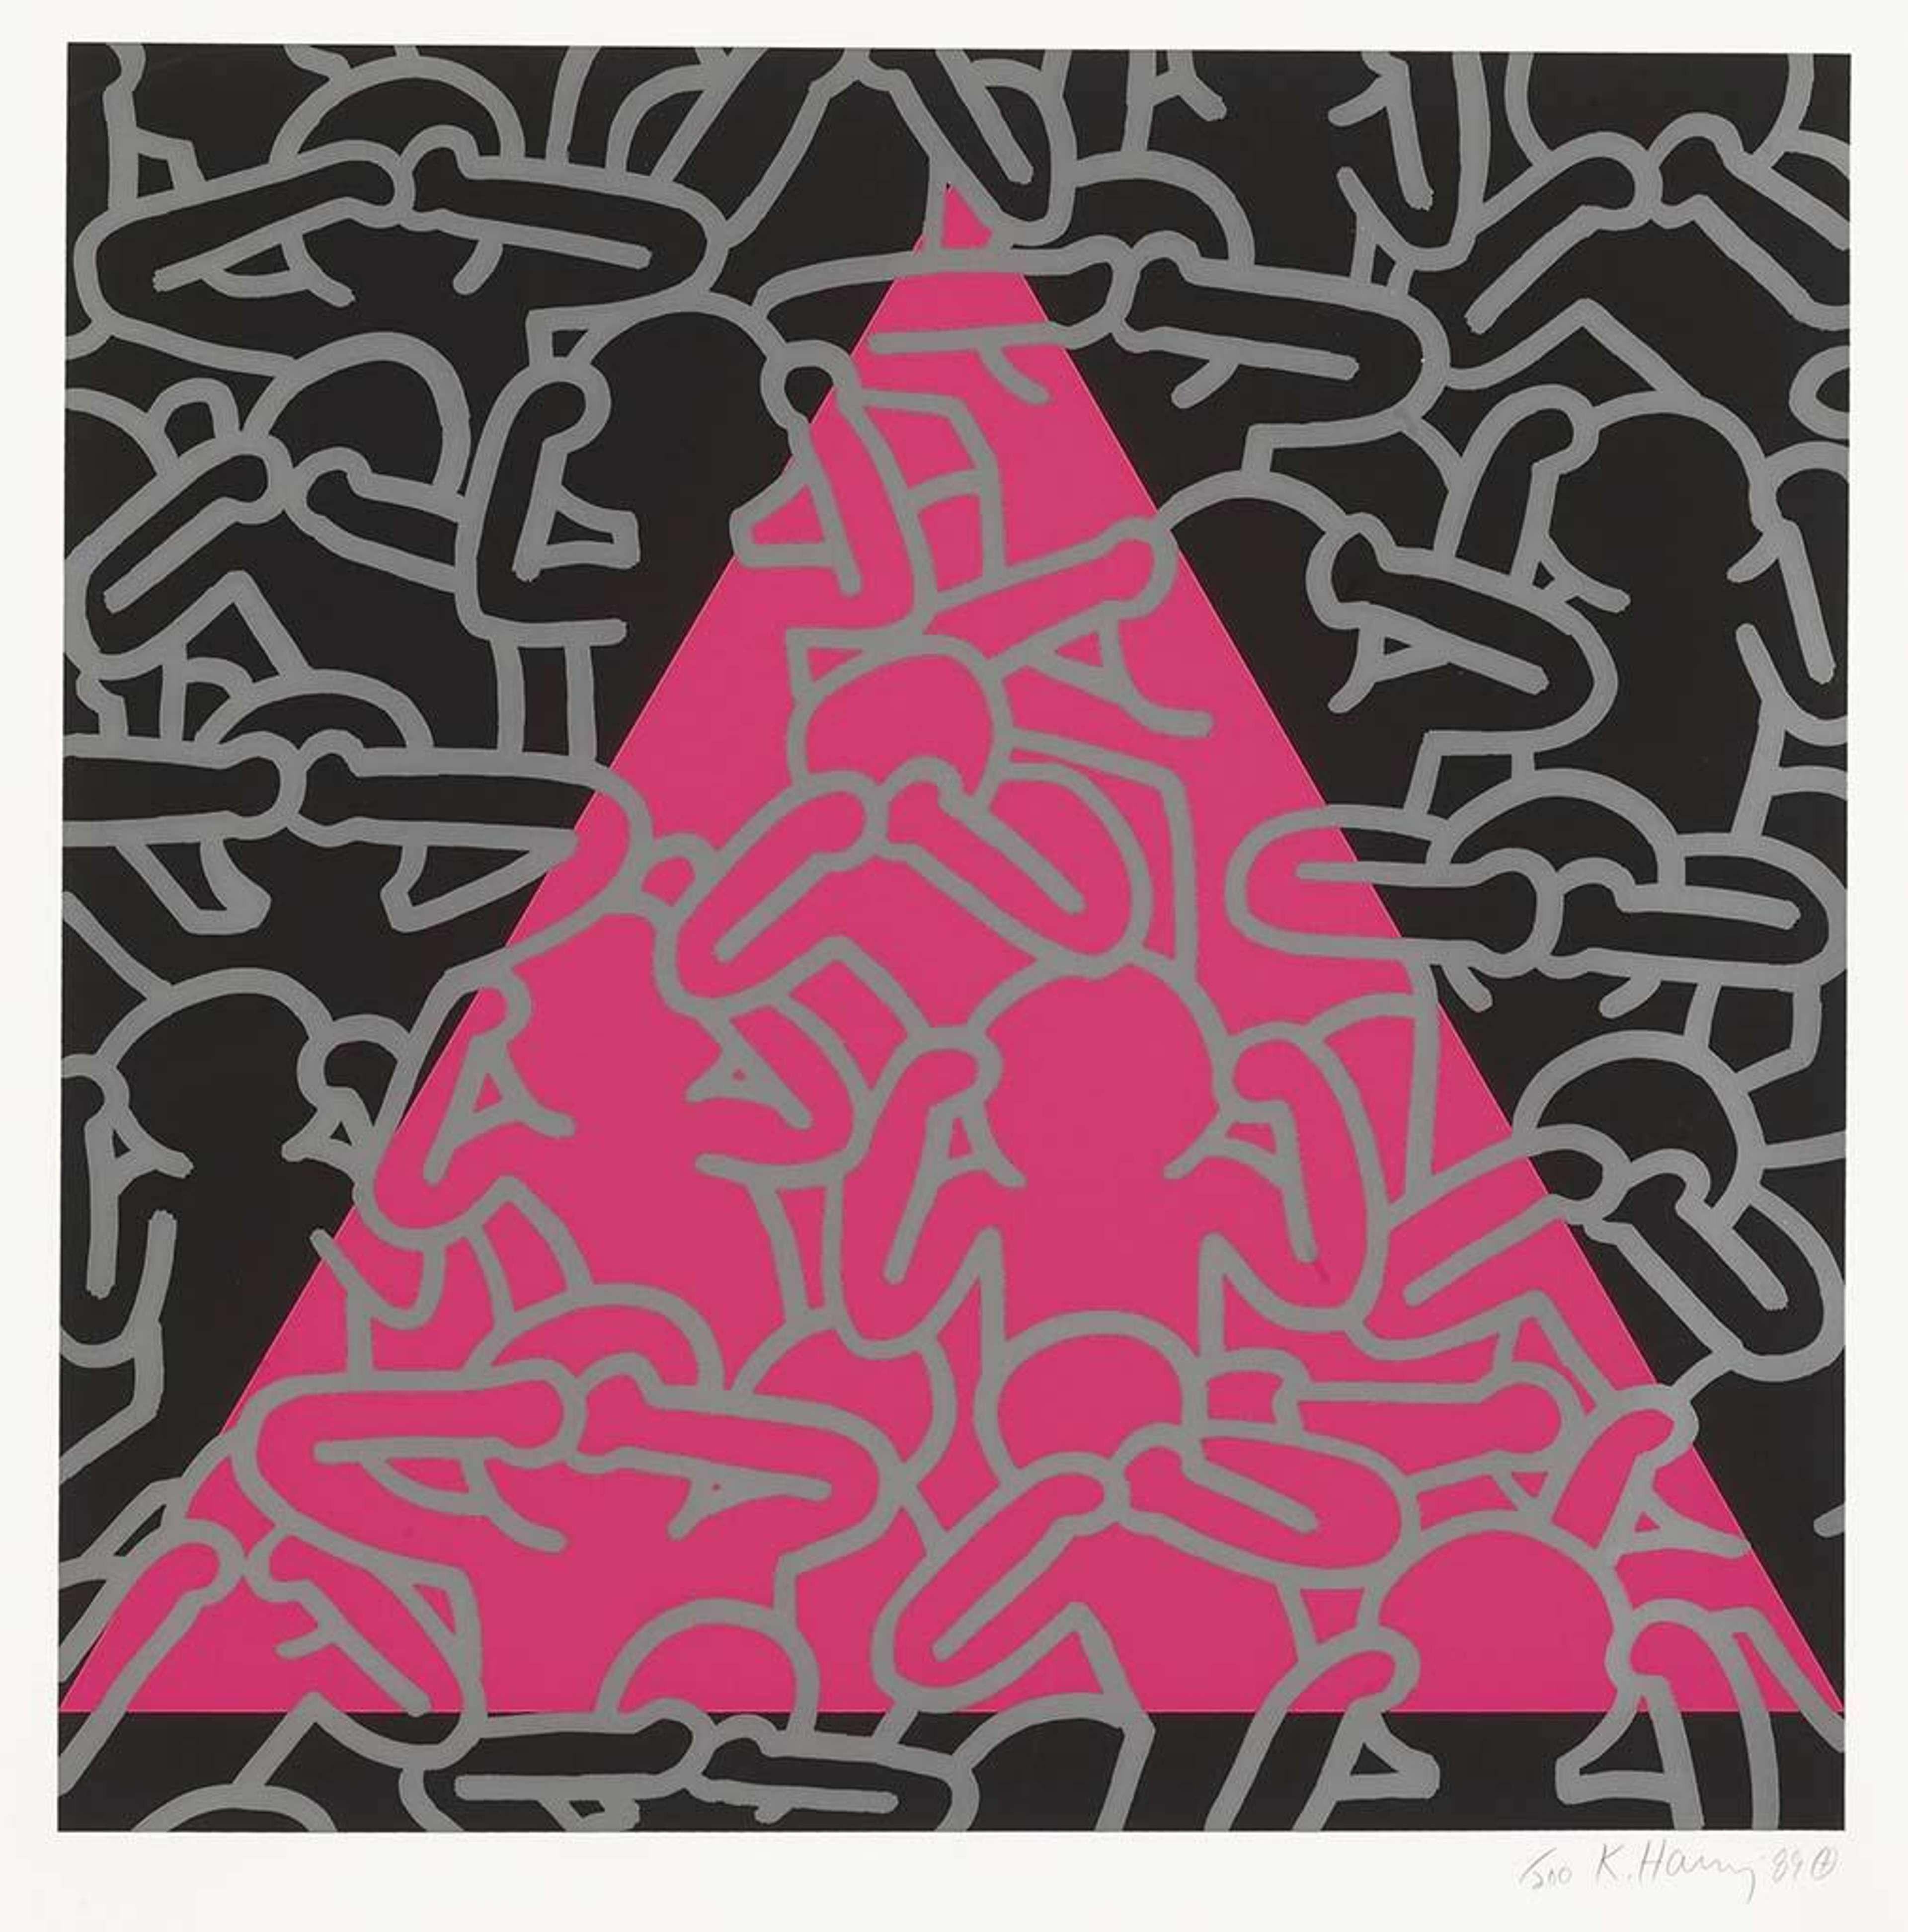 Keith Haring’s Silence Equals Death. A Pop Art screenprint of a pink triangle against a black square with figures covering their eyes, mouths, and noses. 